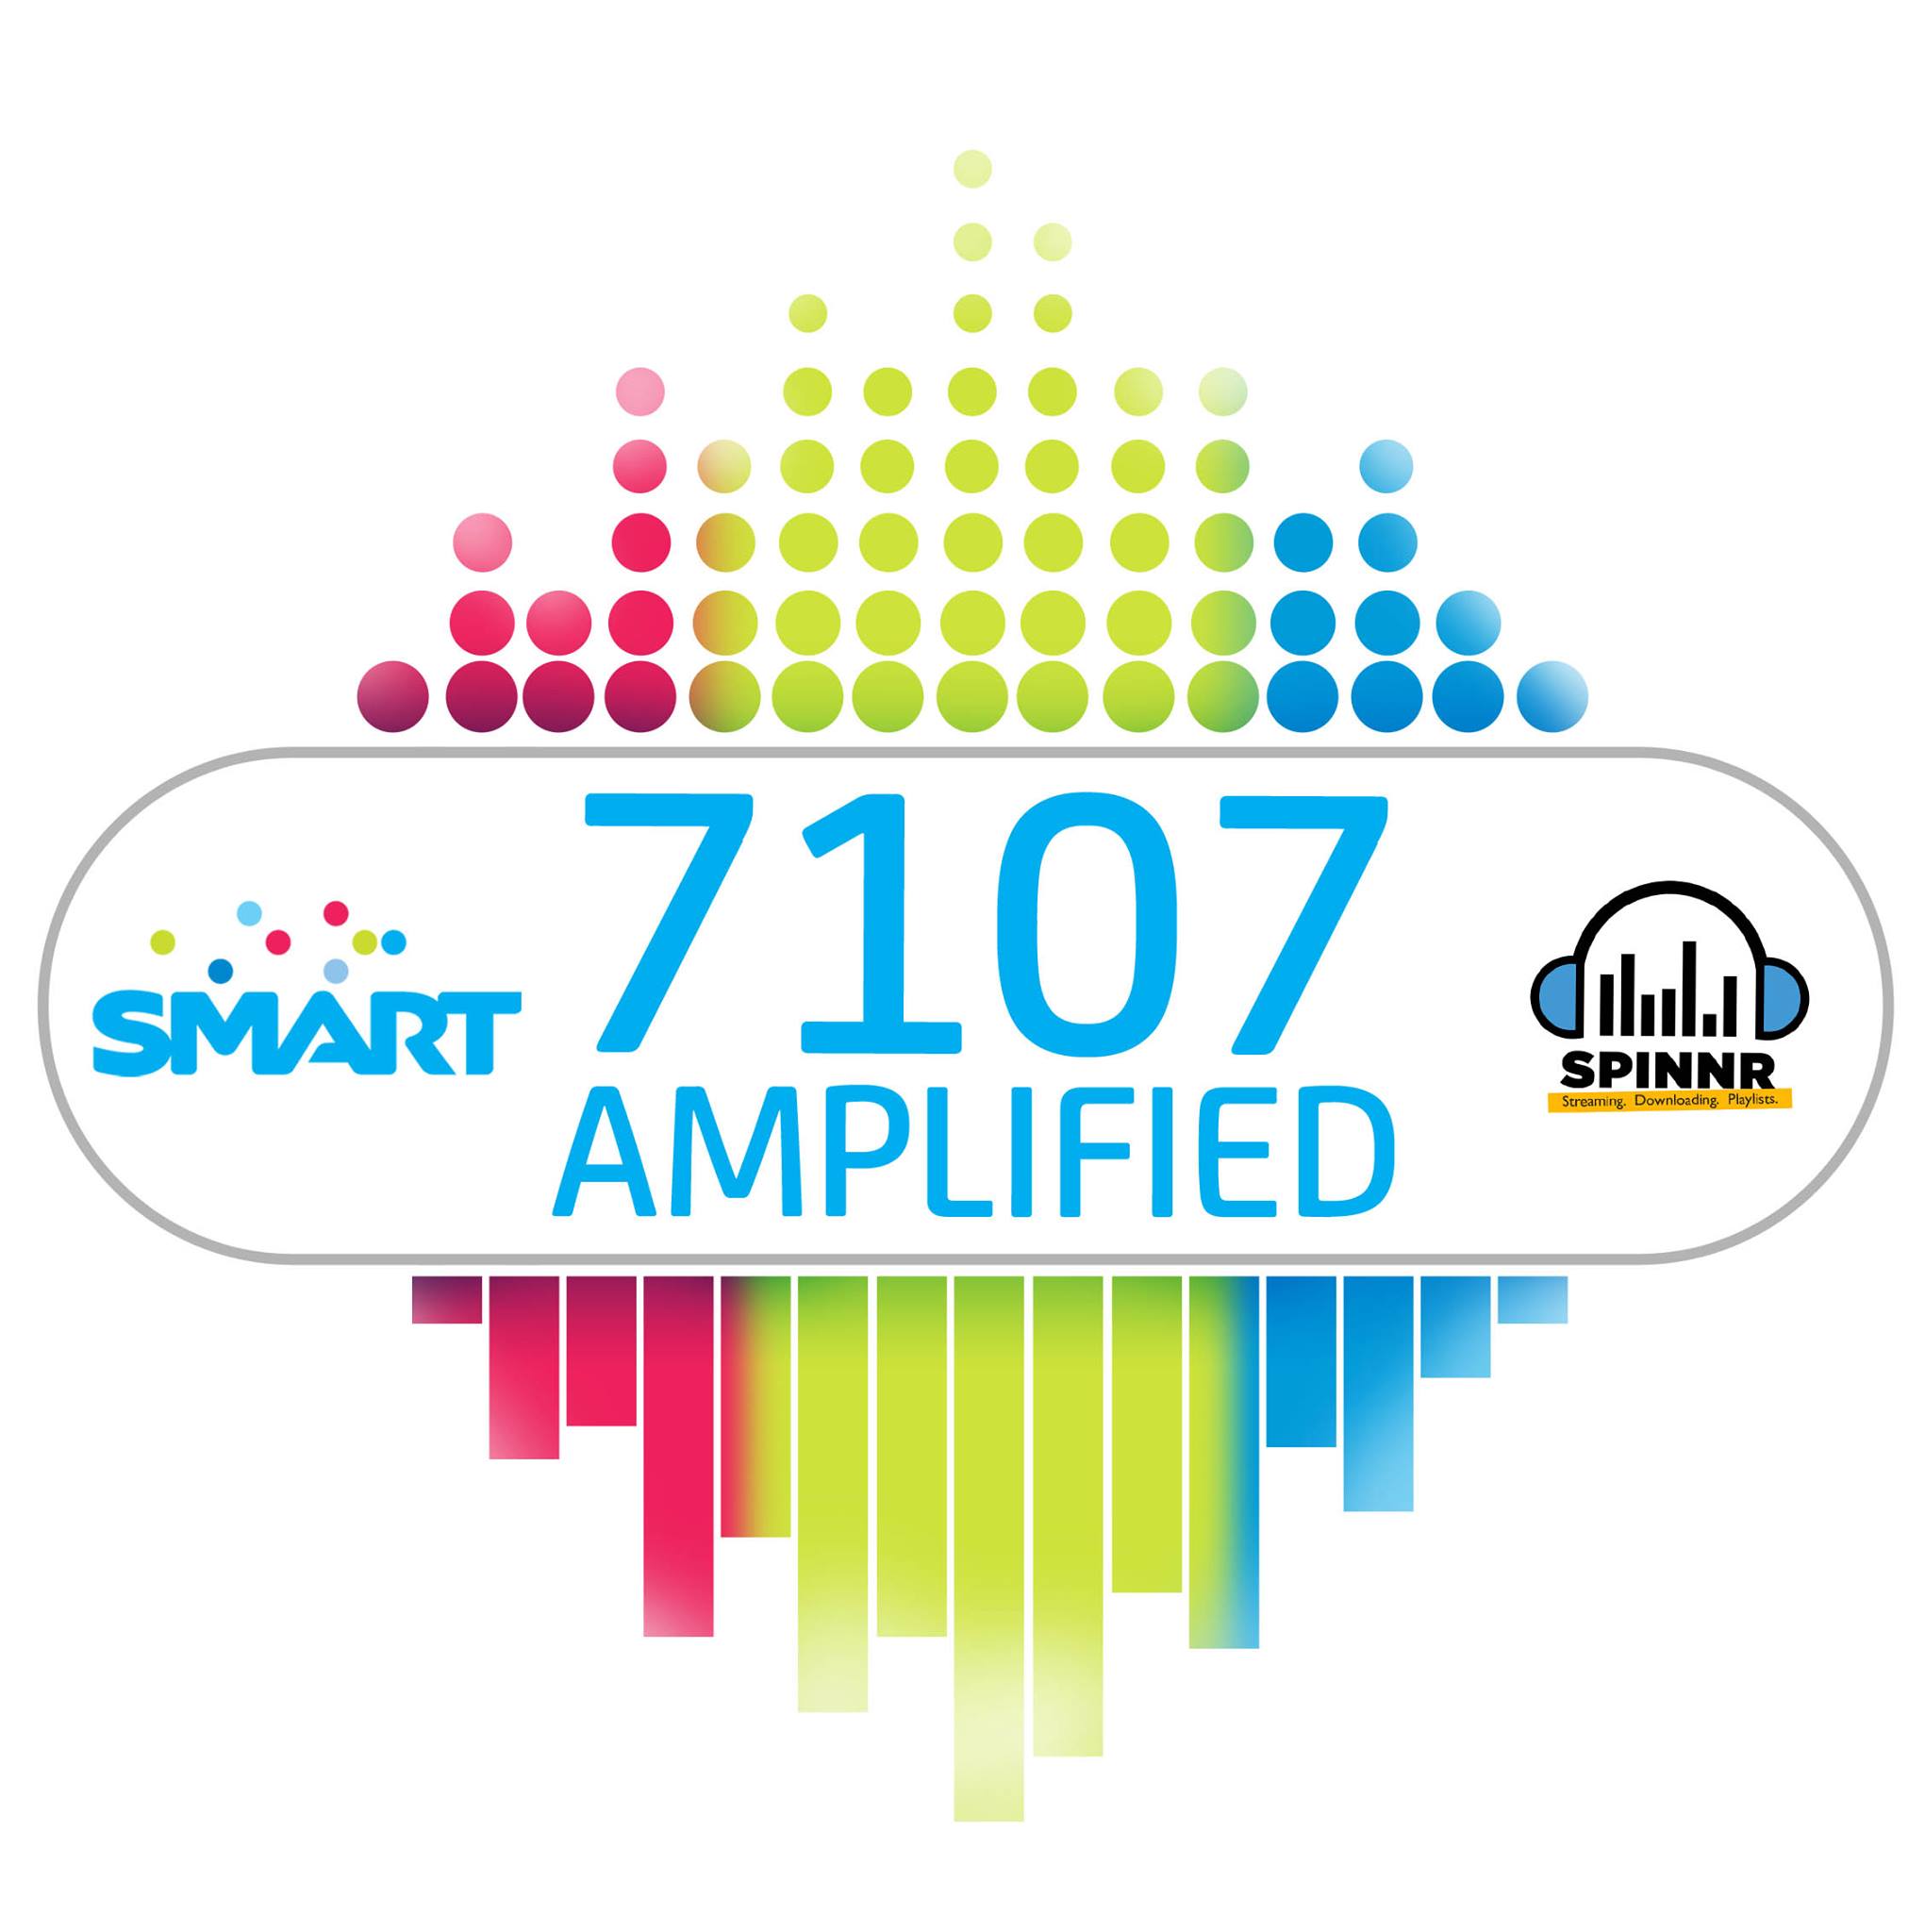 Smart Subscribers and Spinnr Users Get Treats and Have Amplified 7107 Experience